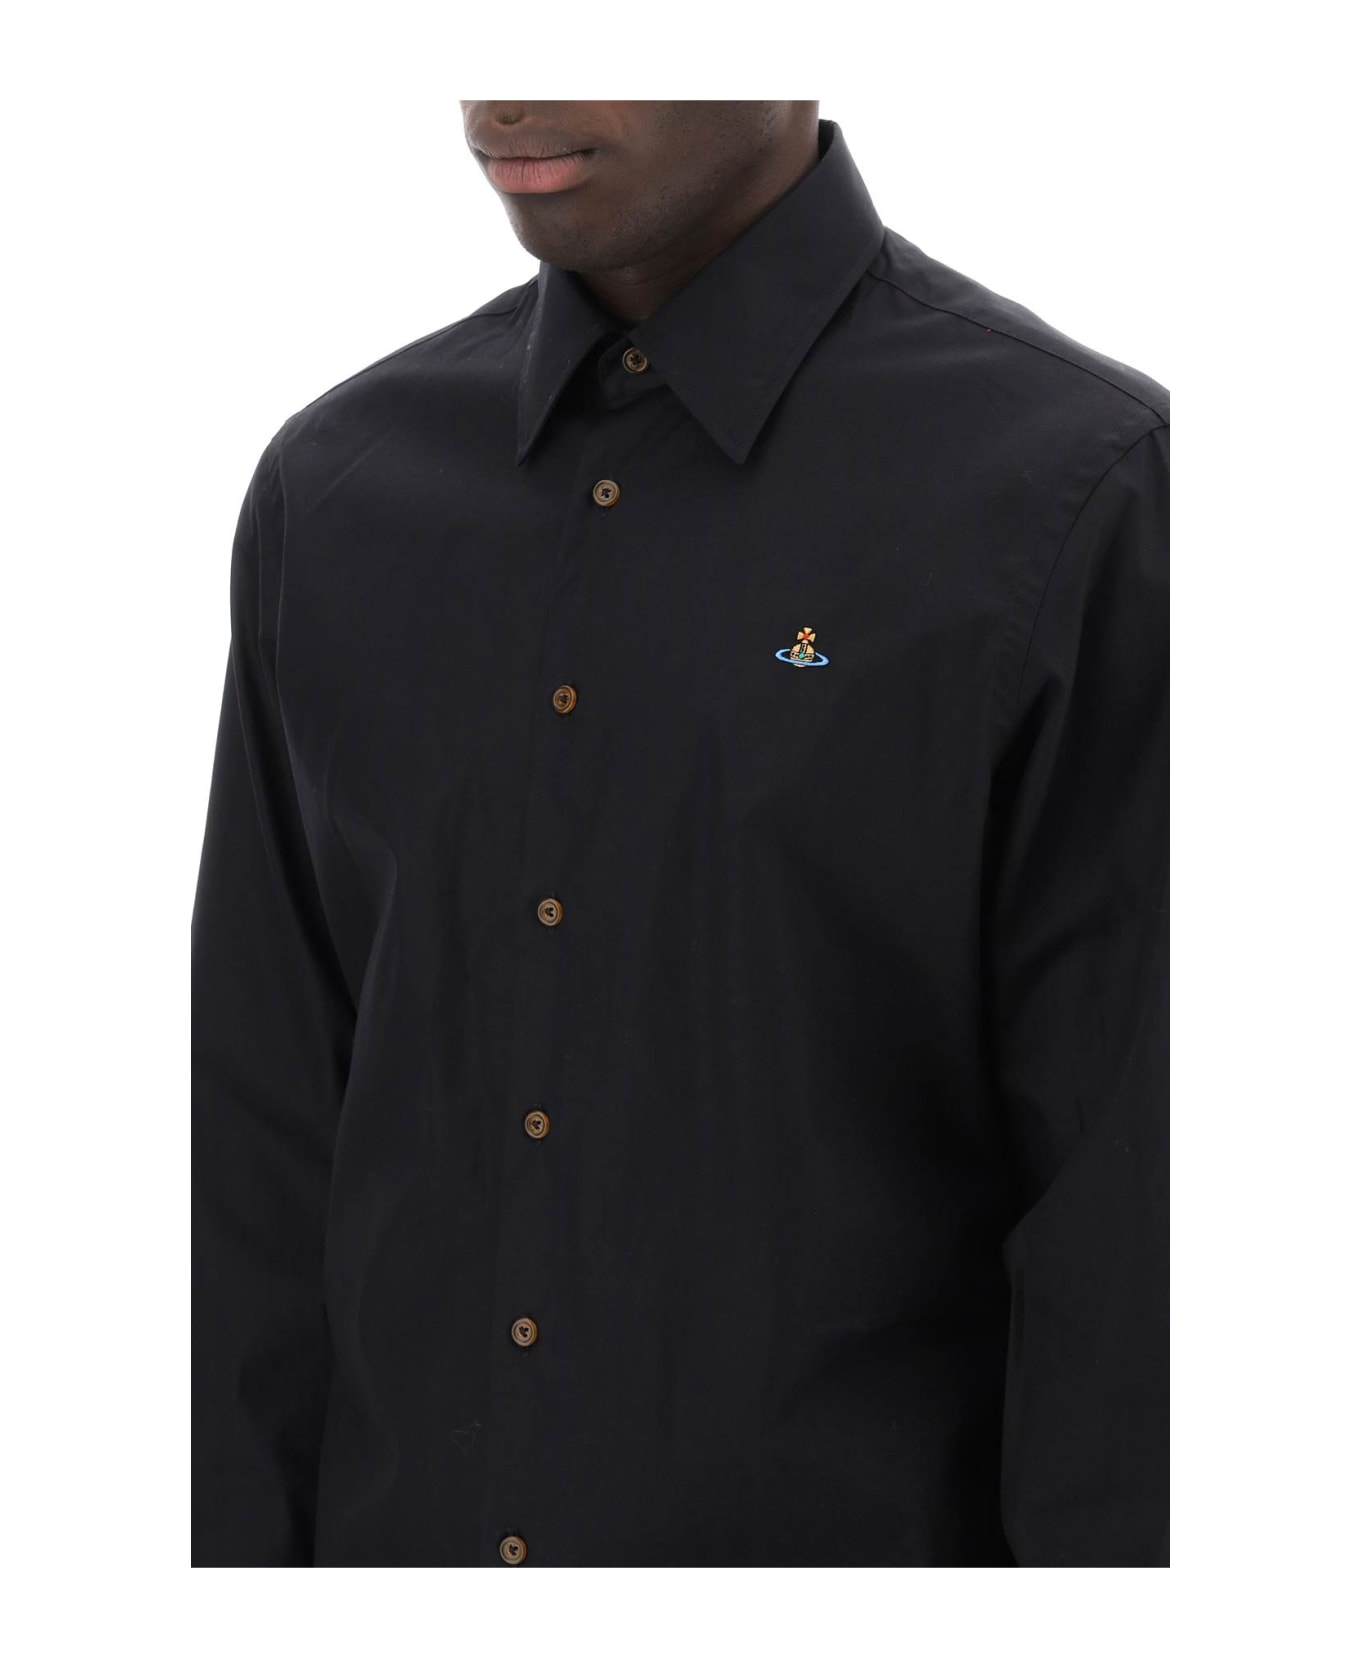 Vivienne Westwood Ghost Shirt With Orb Embroidery - BLACK (Black)